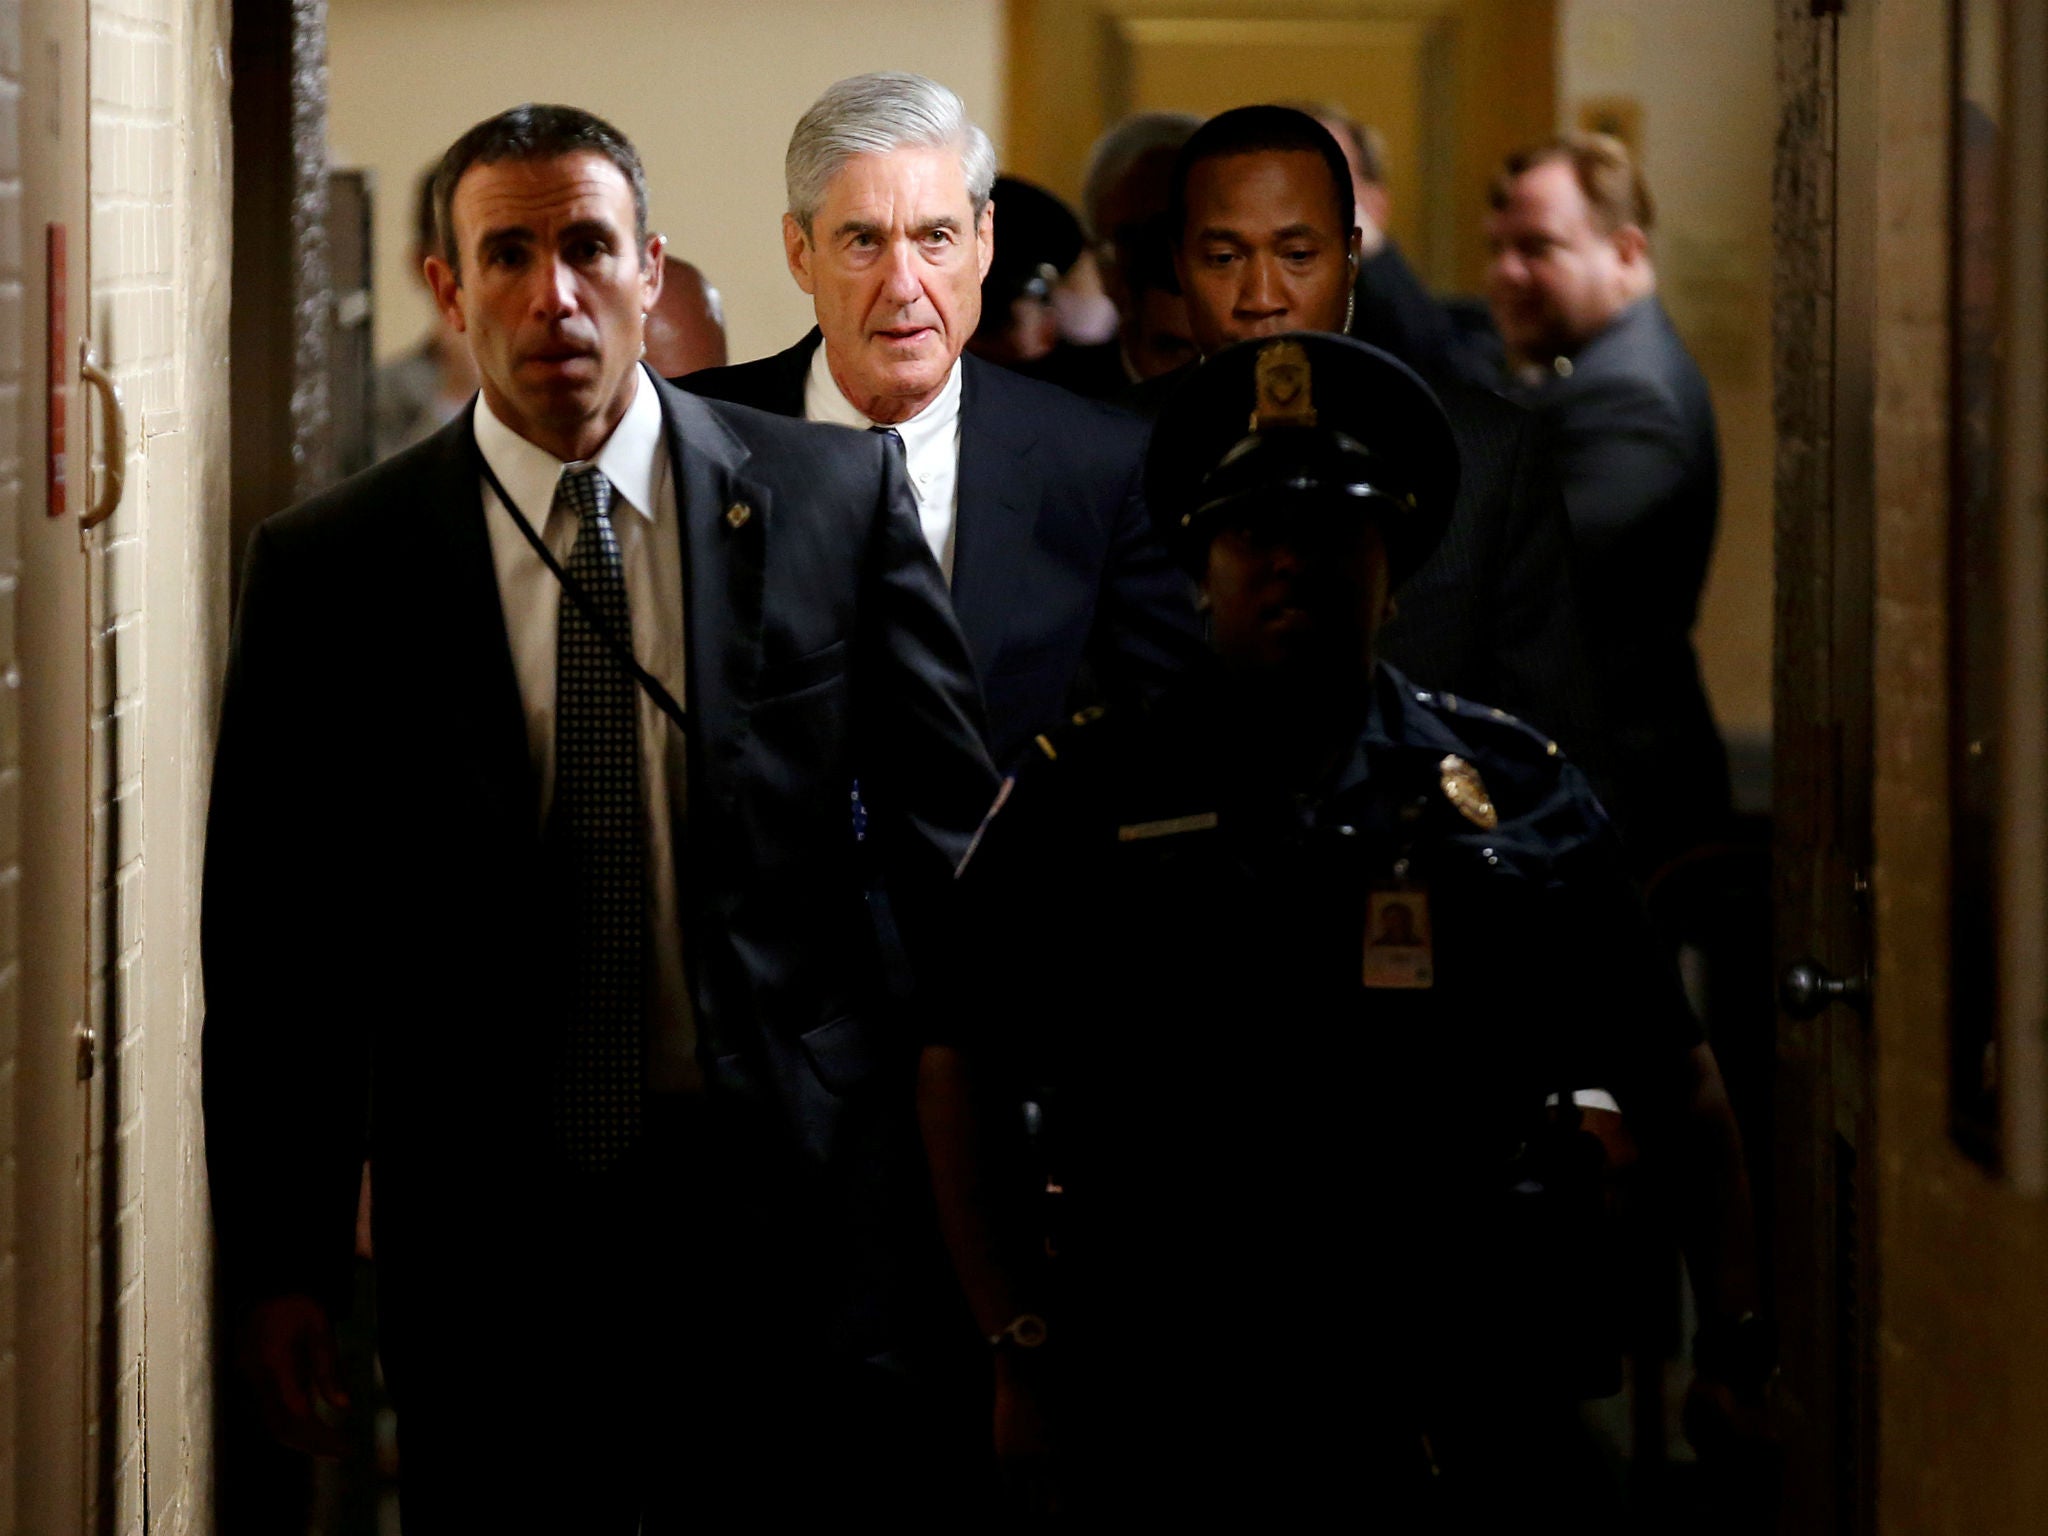 Special Counsel Robert Mueller is under intensifying scrutiny from Republicans